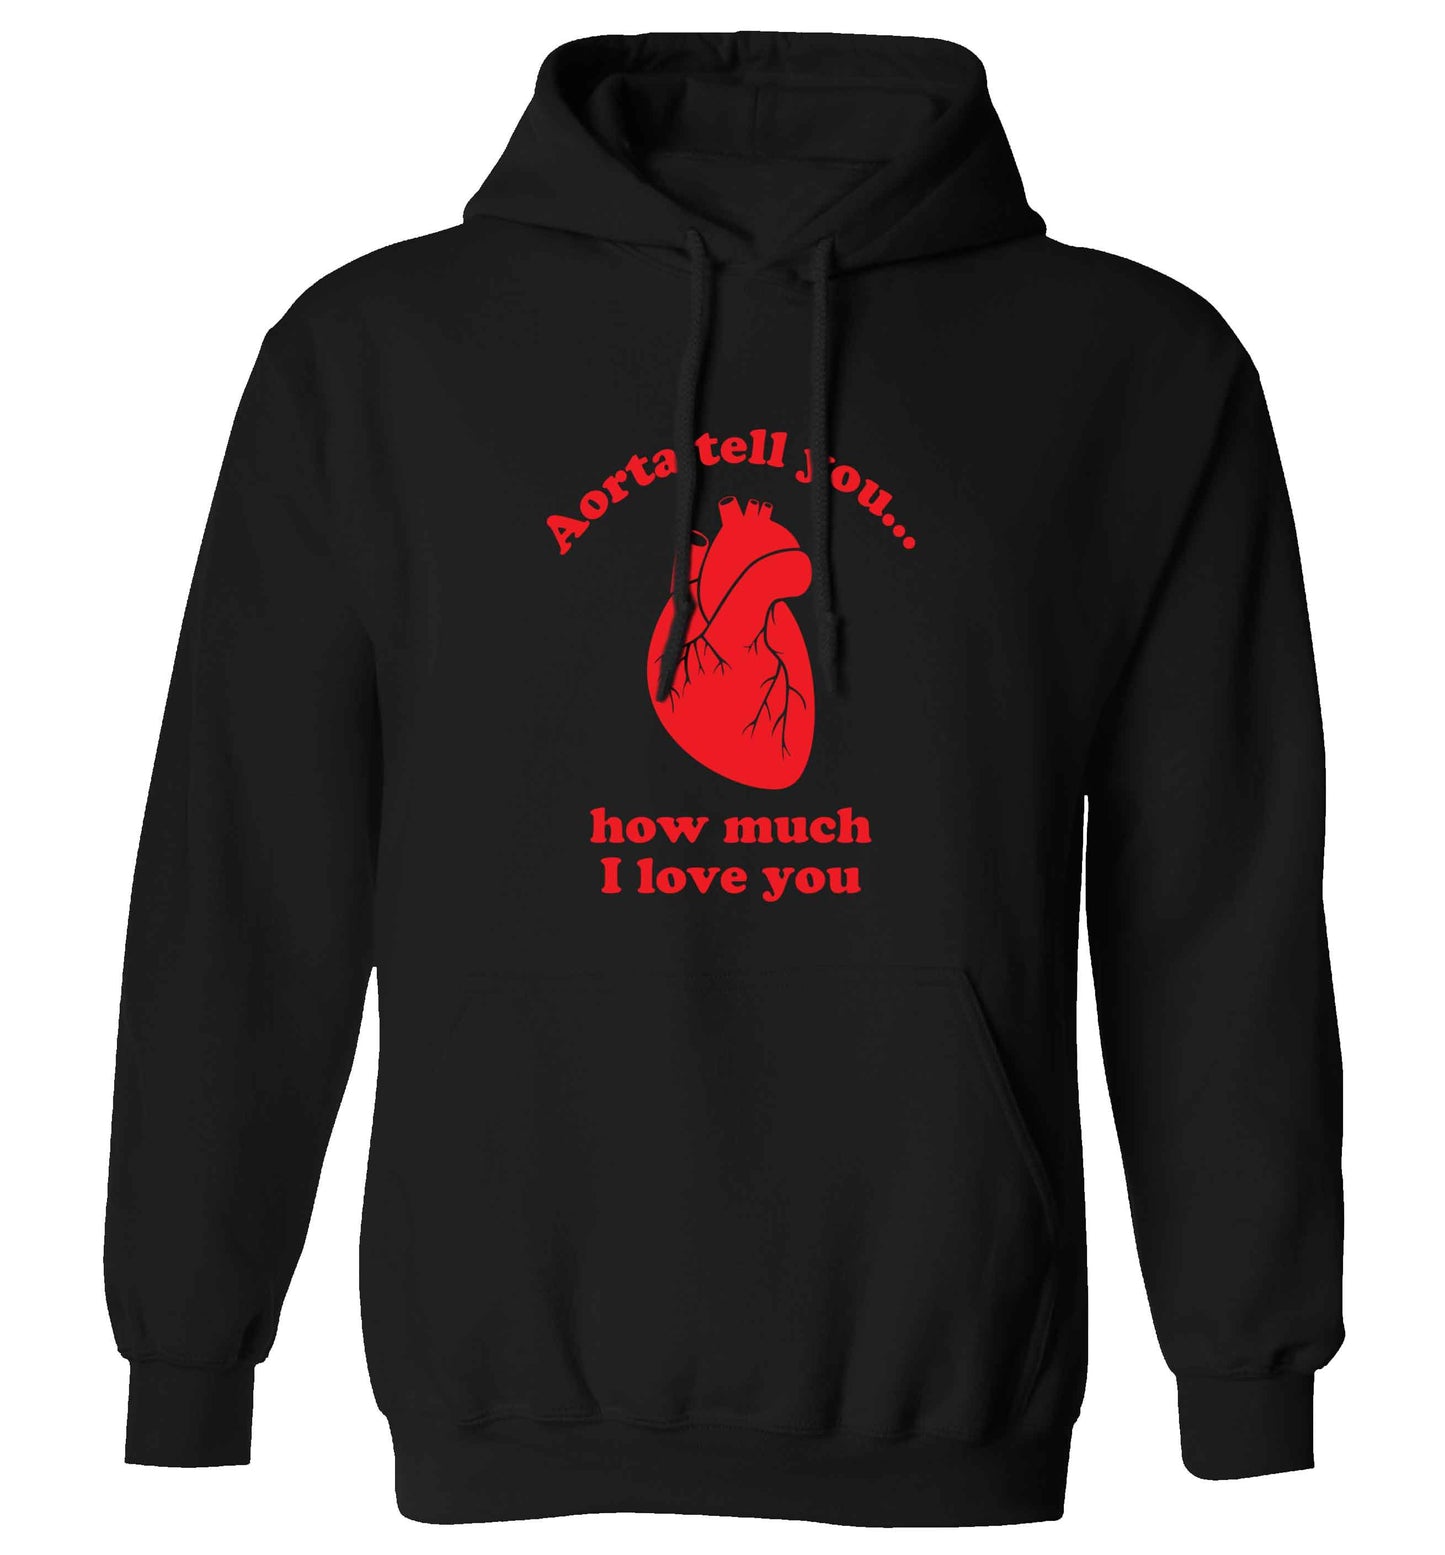 Aorta tell you how much I love you adults unisex black hoodie 2XL